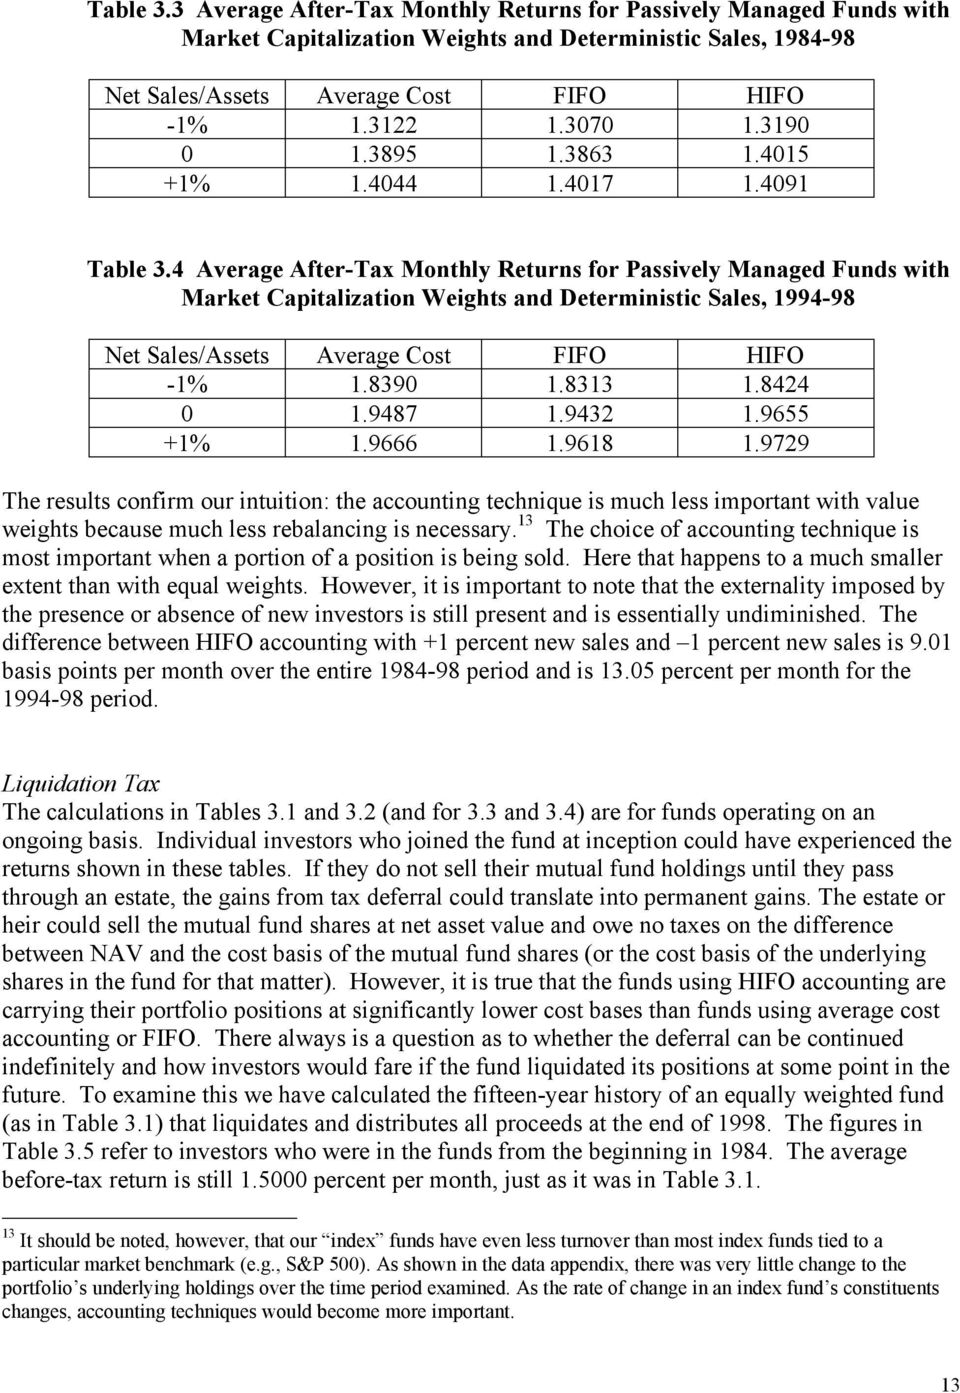 4 Average Afer-Tax Monhly Reurns for Passively Managed Funds wih Marke Capializaion Weighs and Deerminisic Sales, 1994-98 Ne Sales/Asses Average Cos FIFO HIFO -1% 1.8390 1.8313 1.8424 0 1.9487 1.